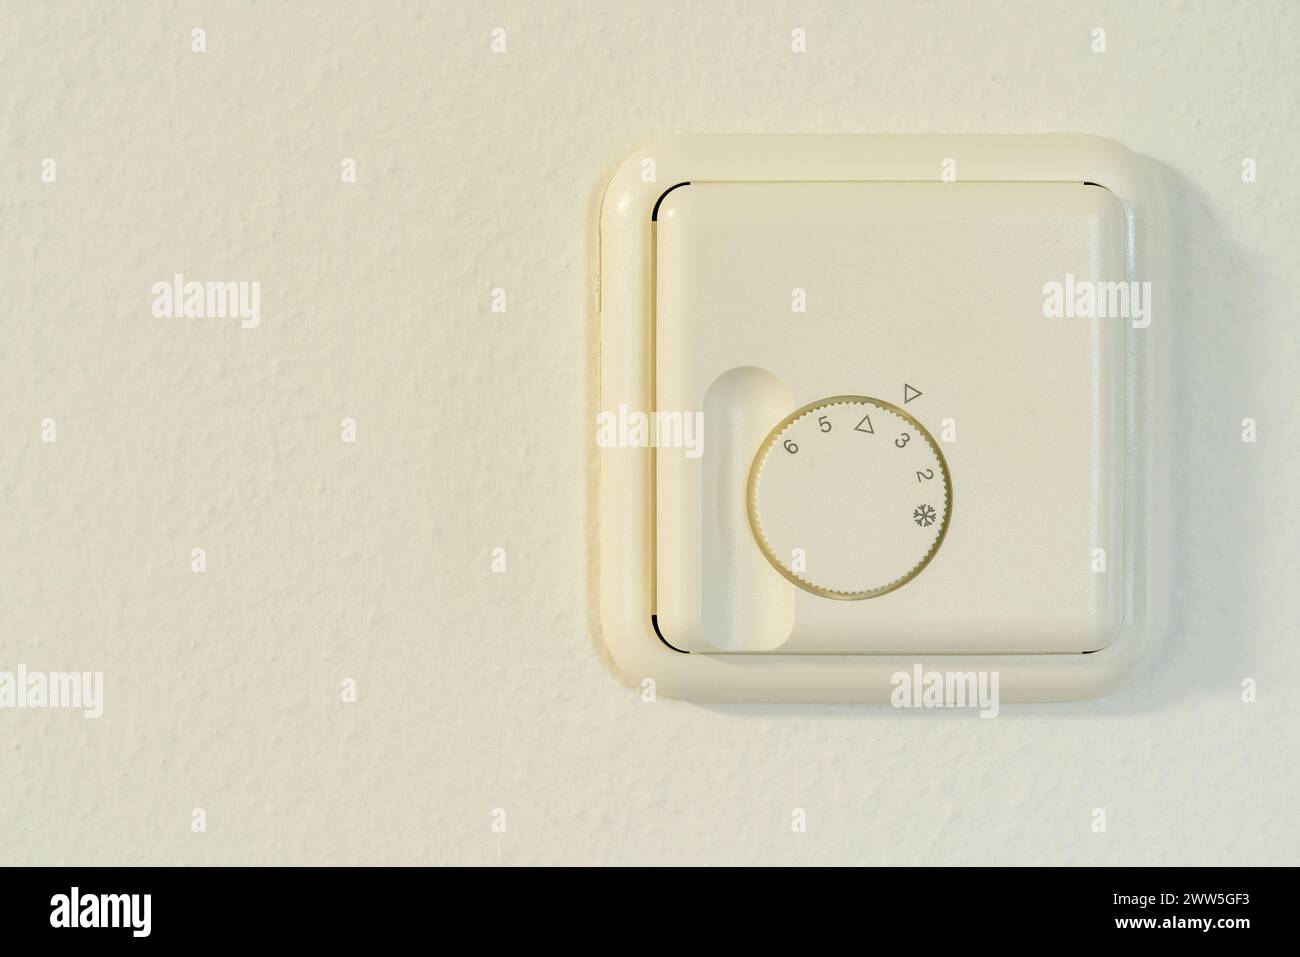 Thermostat adjustment device in white, mounted on a wall, with numbers, for regulating the room temperature. Stock Photo